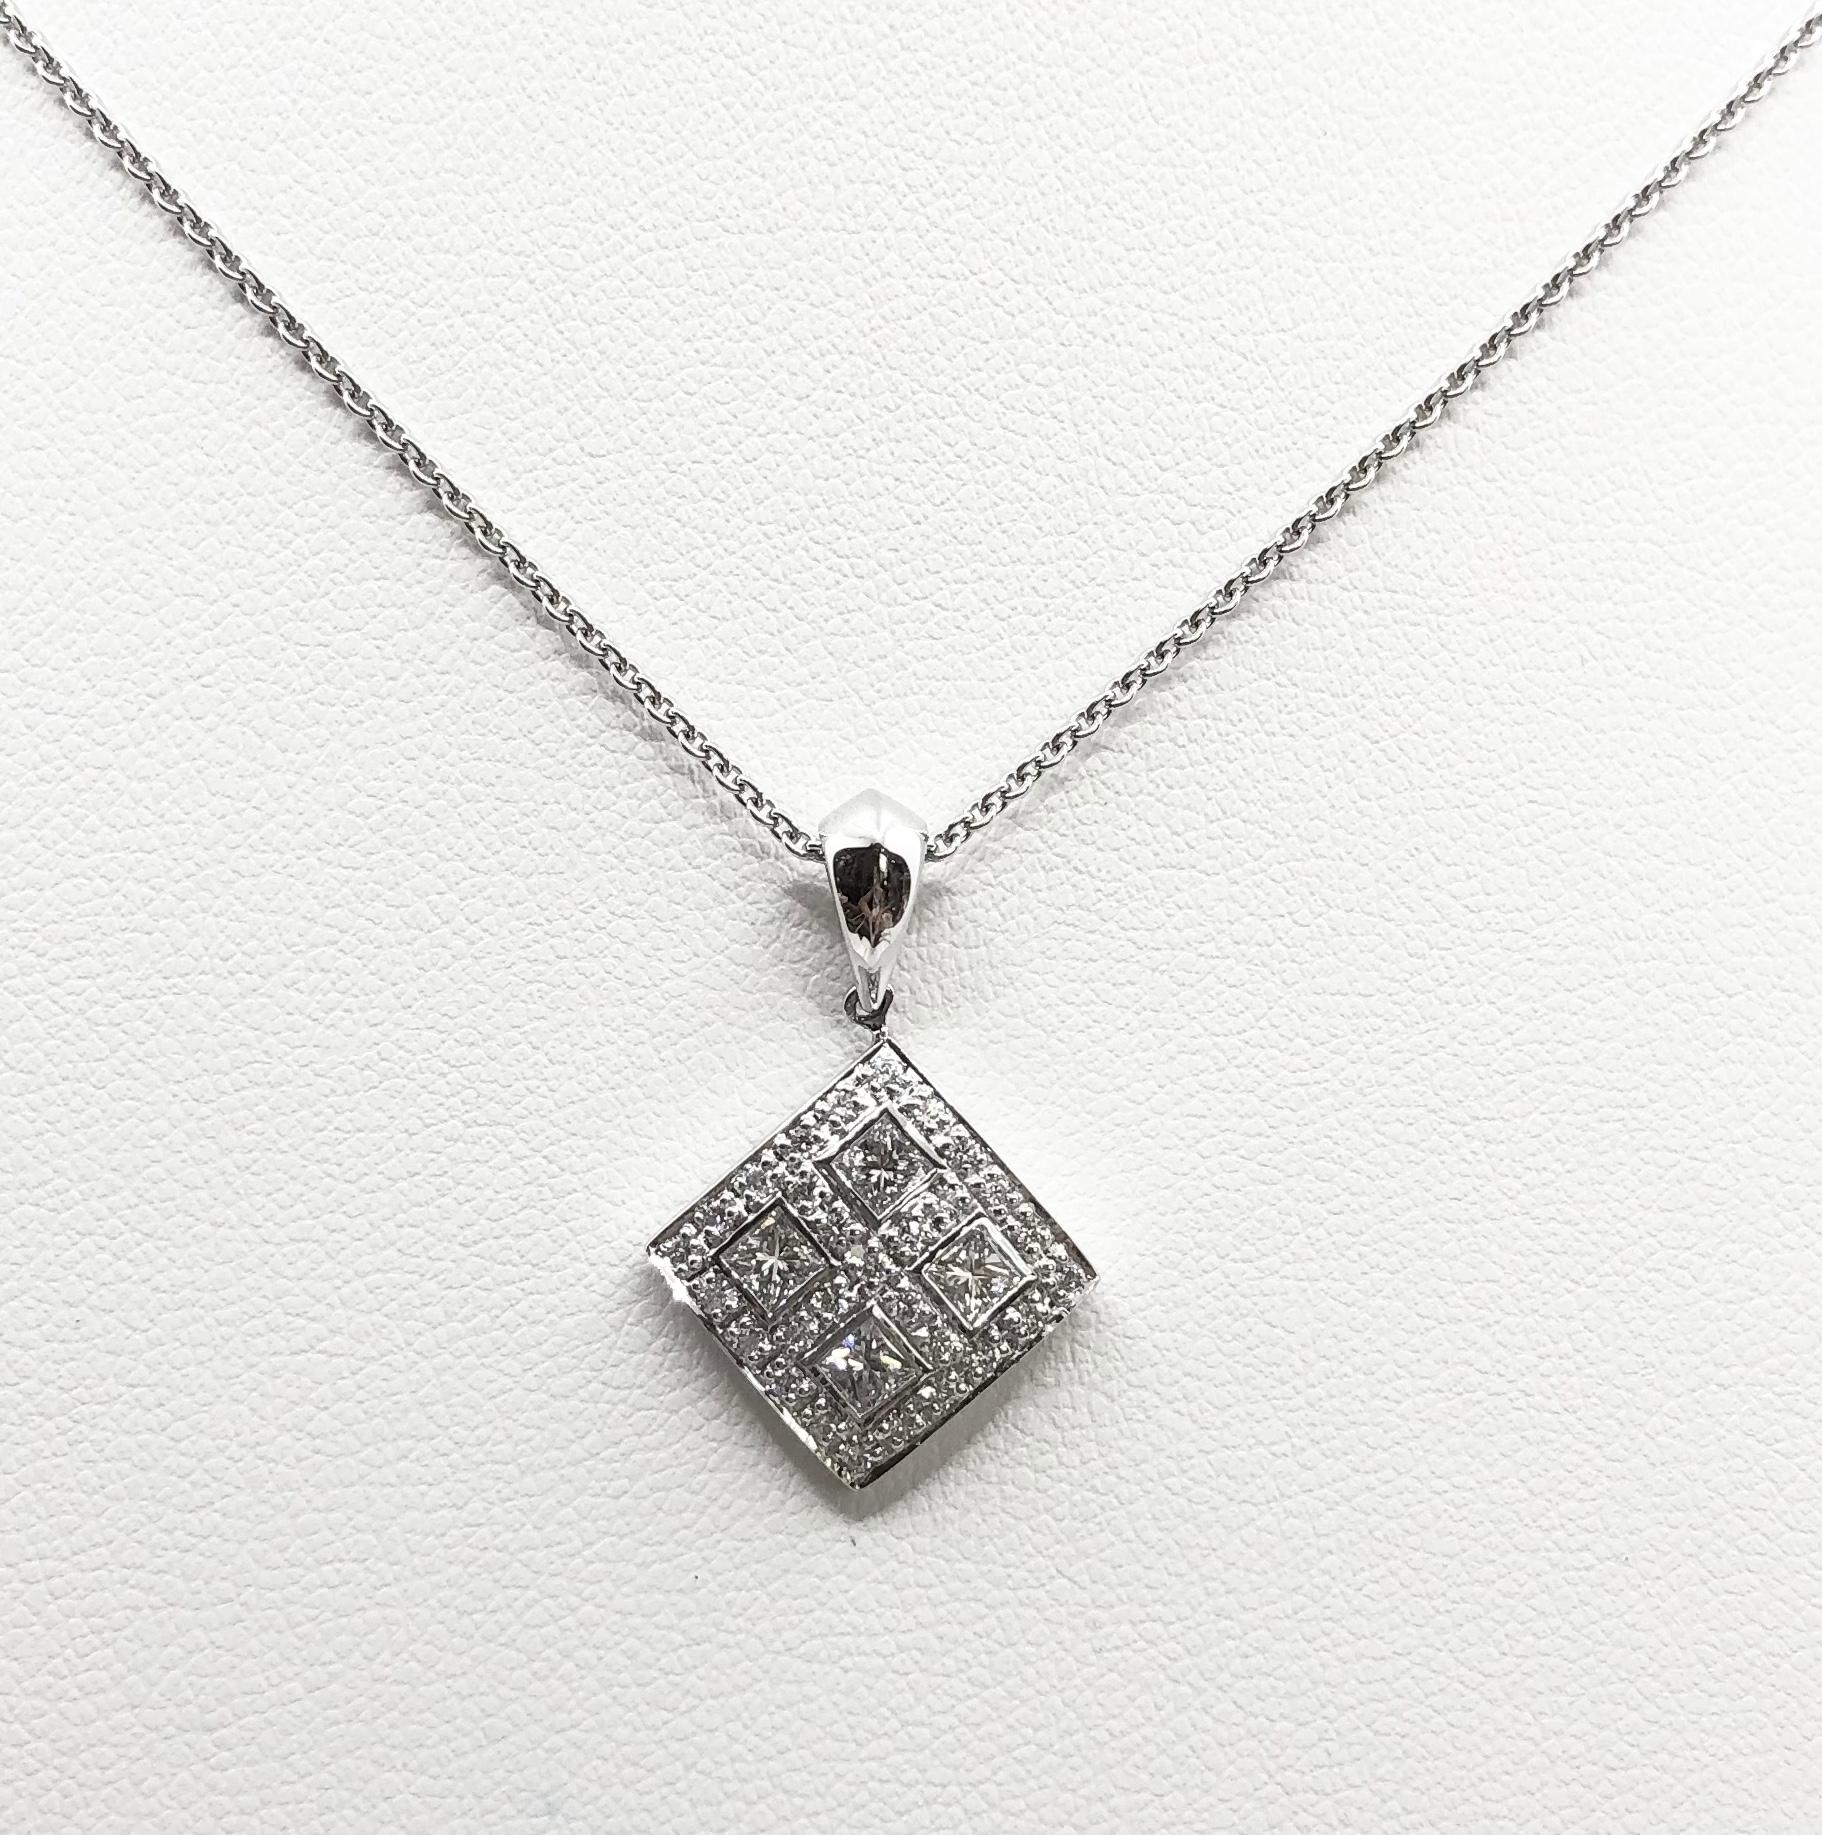 Diamond 0.67 carat Pendant set in 18 Karat White Gold Settings
(chain not included)

Width: 1.6 cm 
Length: 2.5 cm
Total Weight: 2.73 grams

